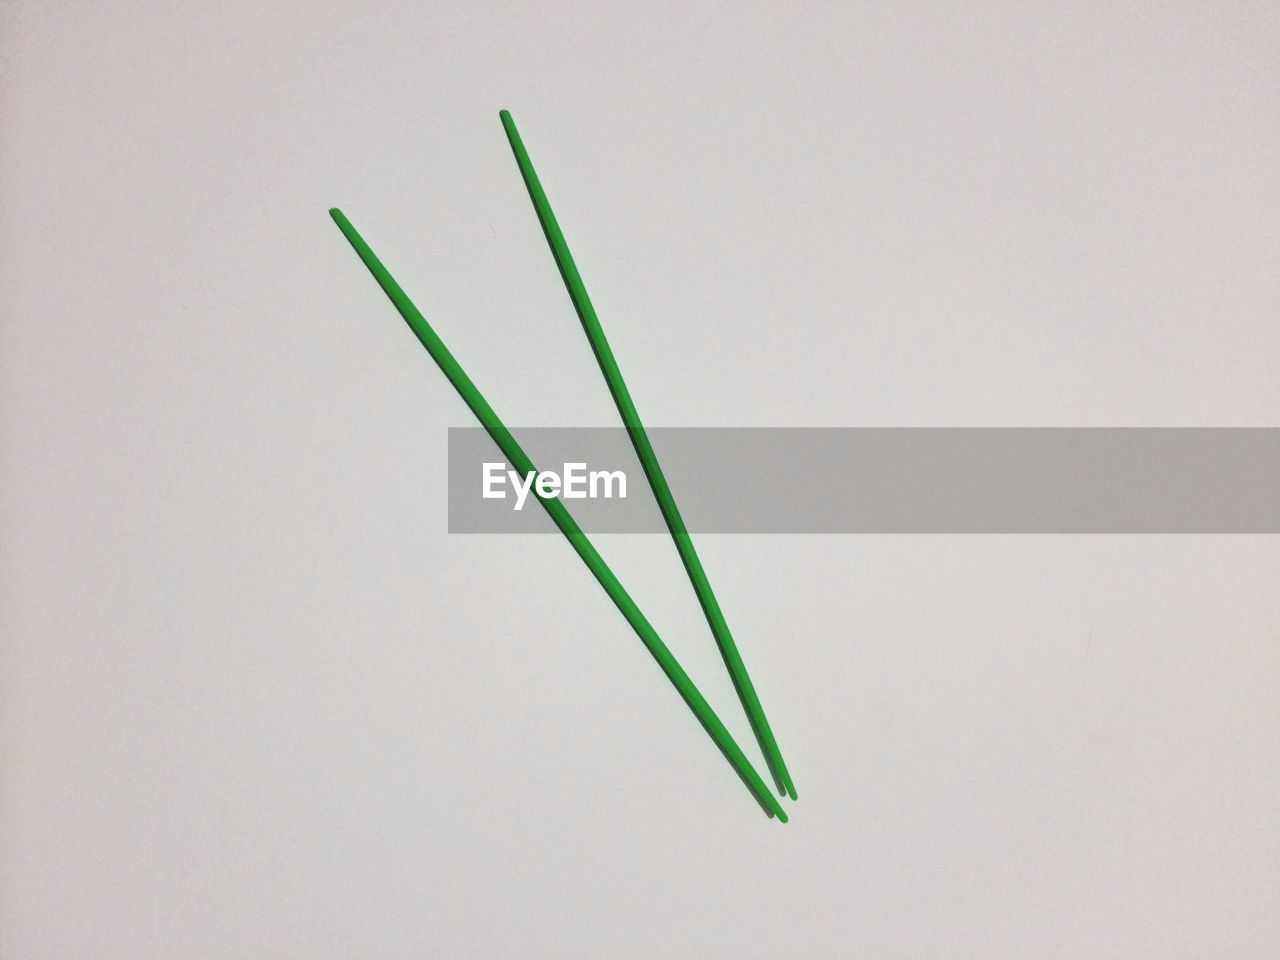 Green pick-up sticks against gray background